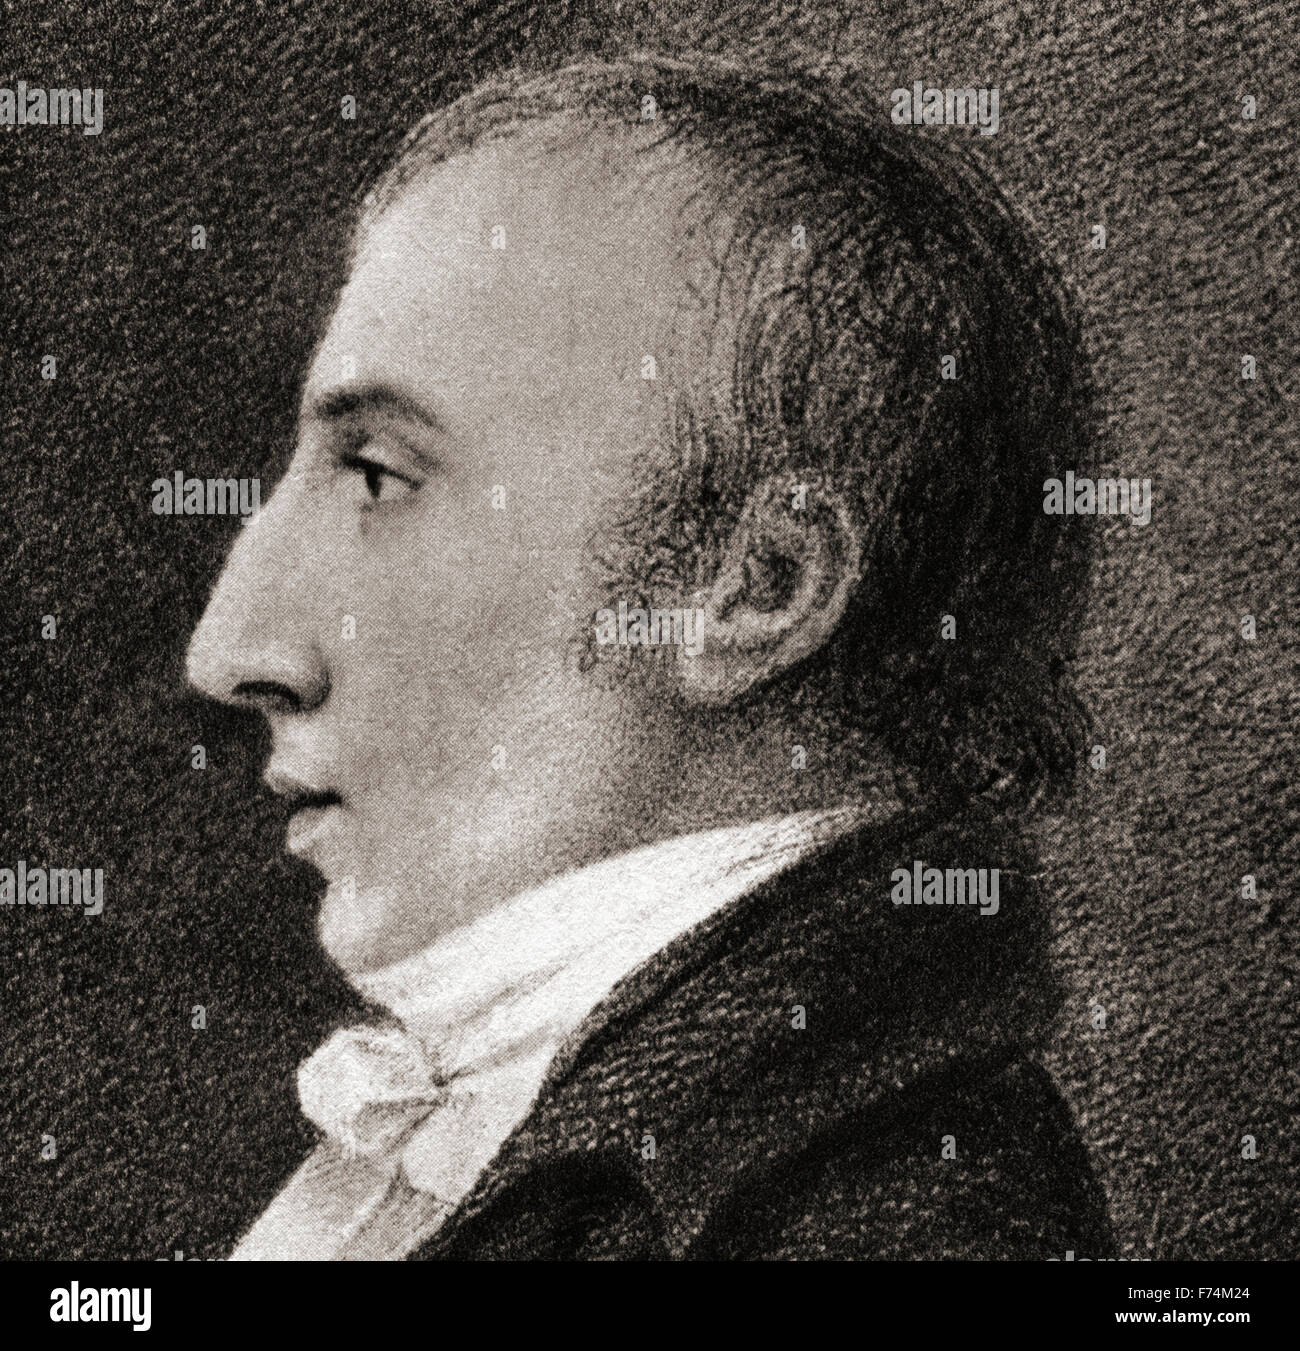 William Wordsworth, 1770 - 1850. English poet.  After the drawing by Robert Hancock in 1798. Stock Photo